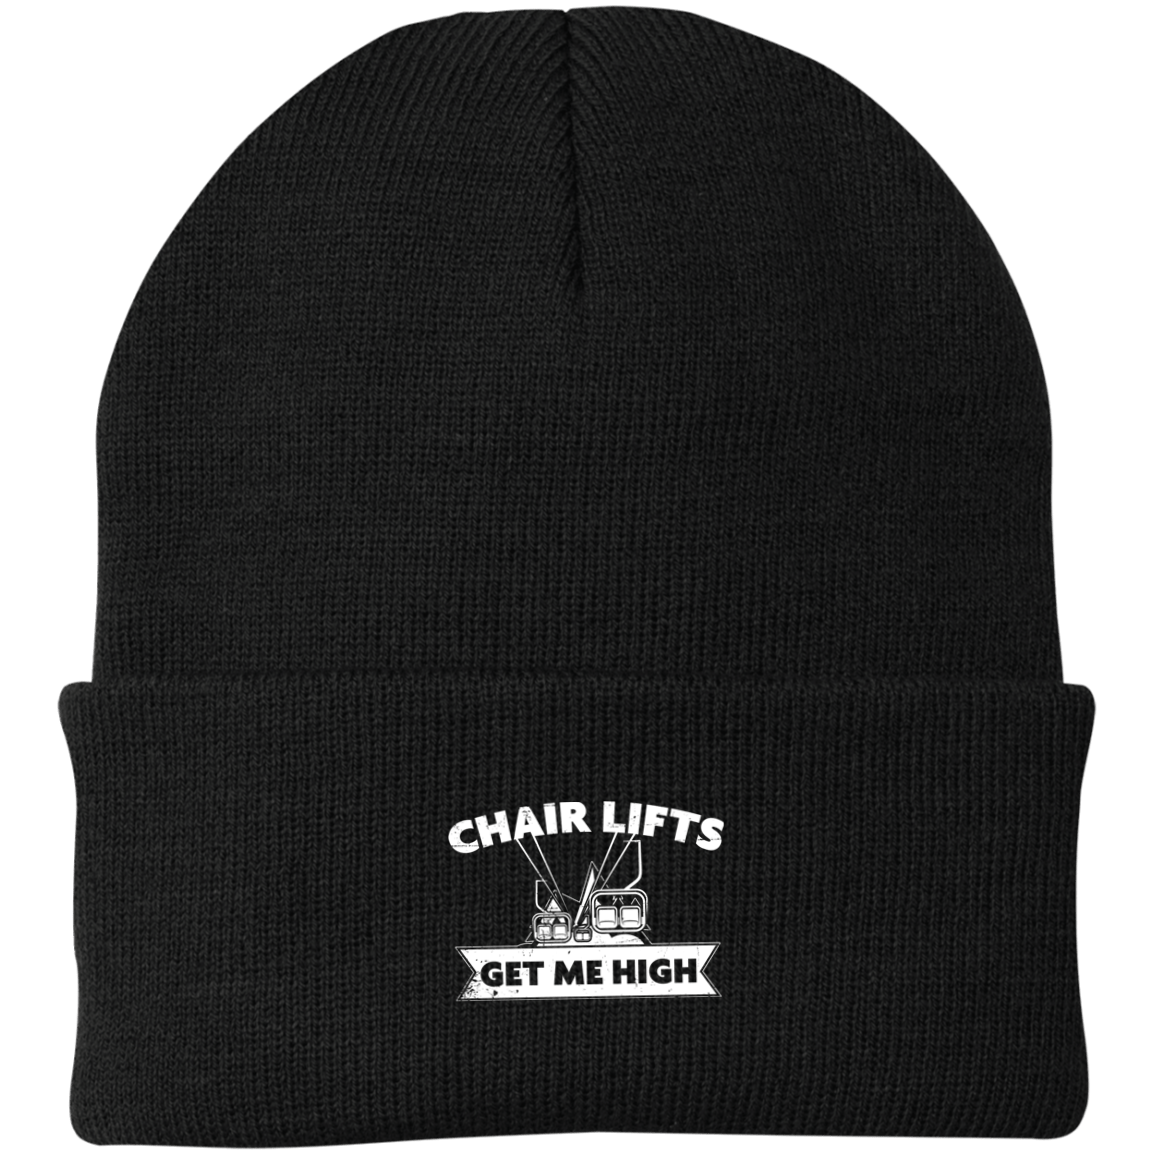 Chairlifts Get Me High Knit Cap - Powderaddicts